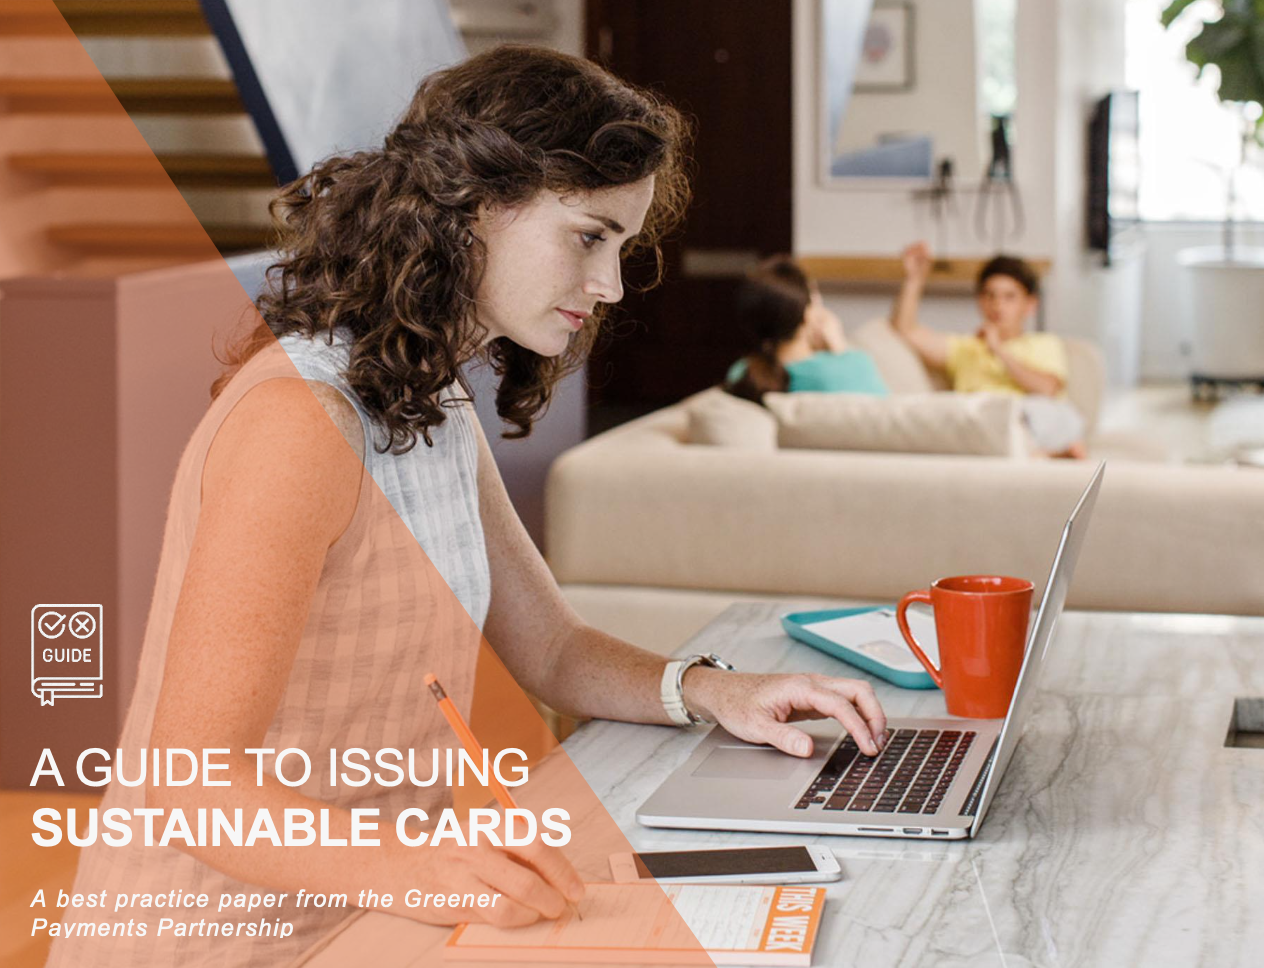 A Guide to Issuing Sustainable Cards